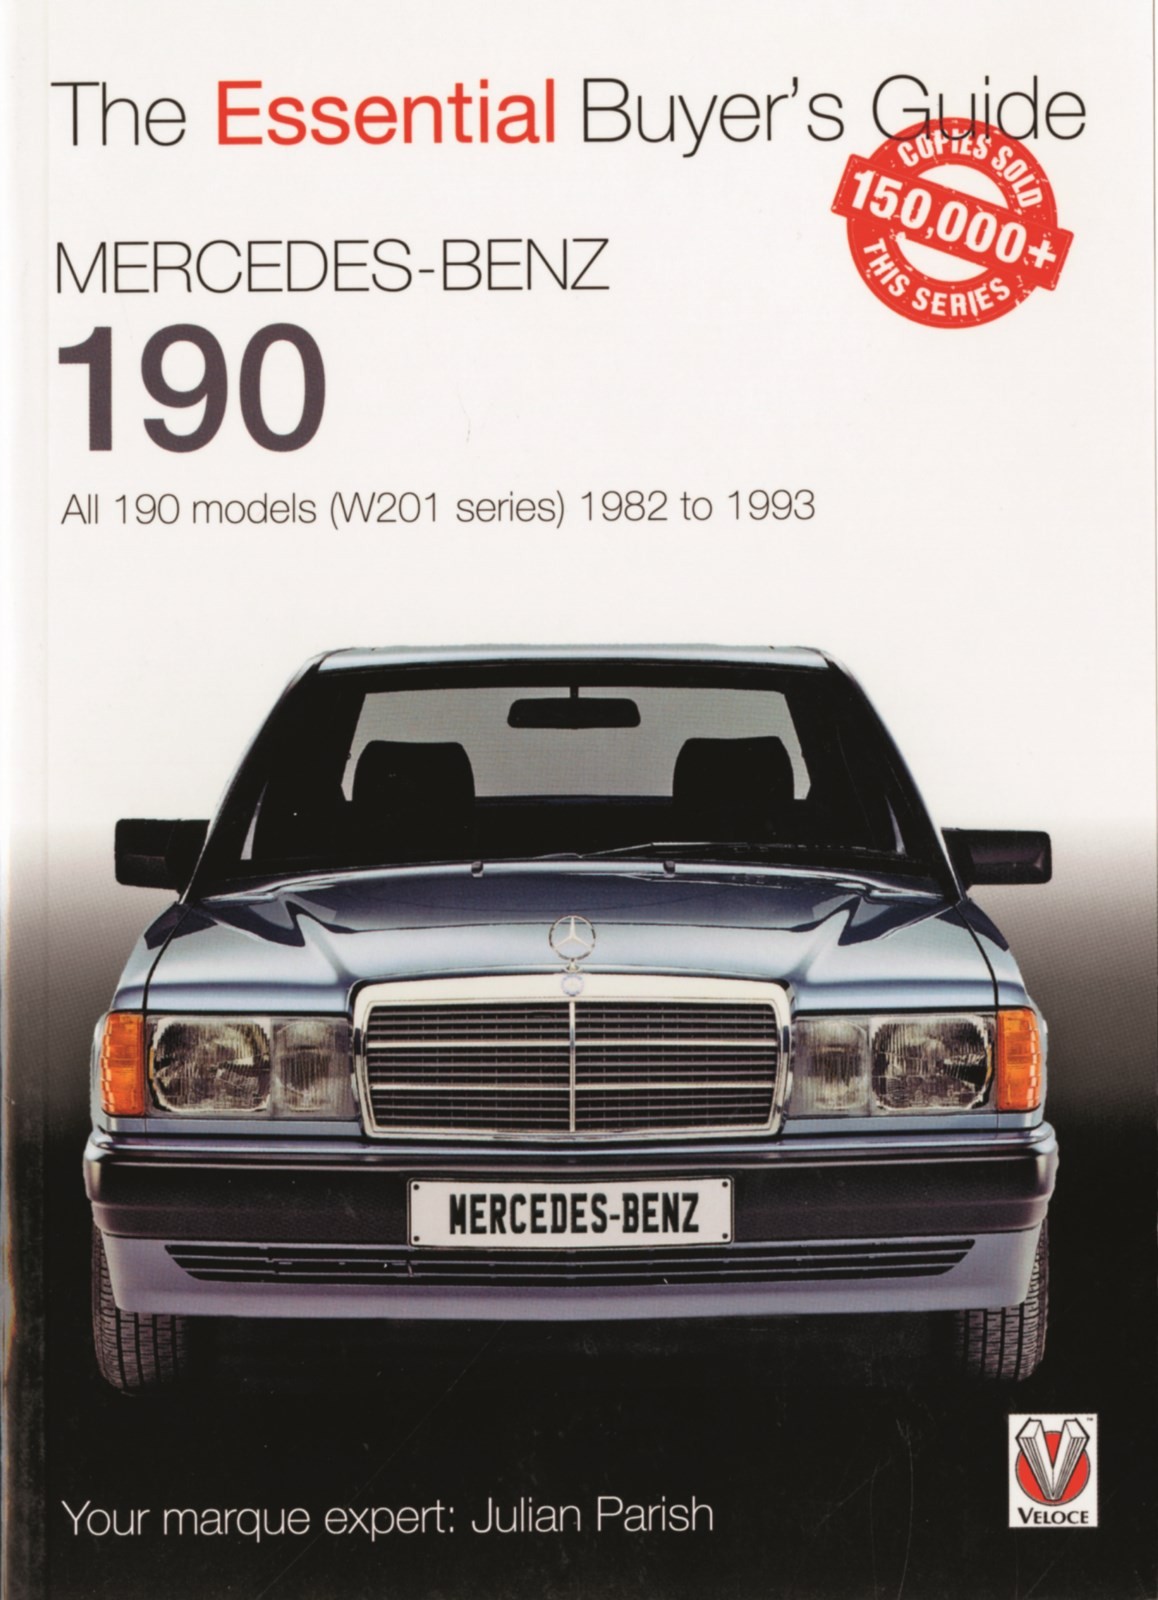 Essential buyer's guide Mercedes-Benz 190 all 190 models (W201 series) 1982 to 1993